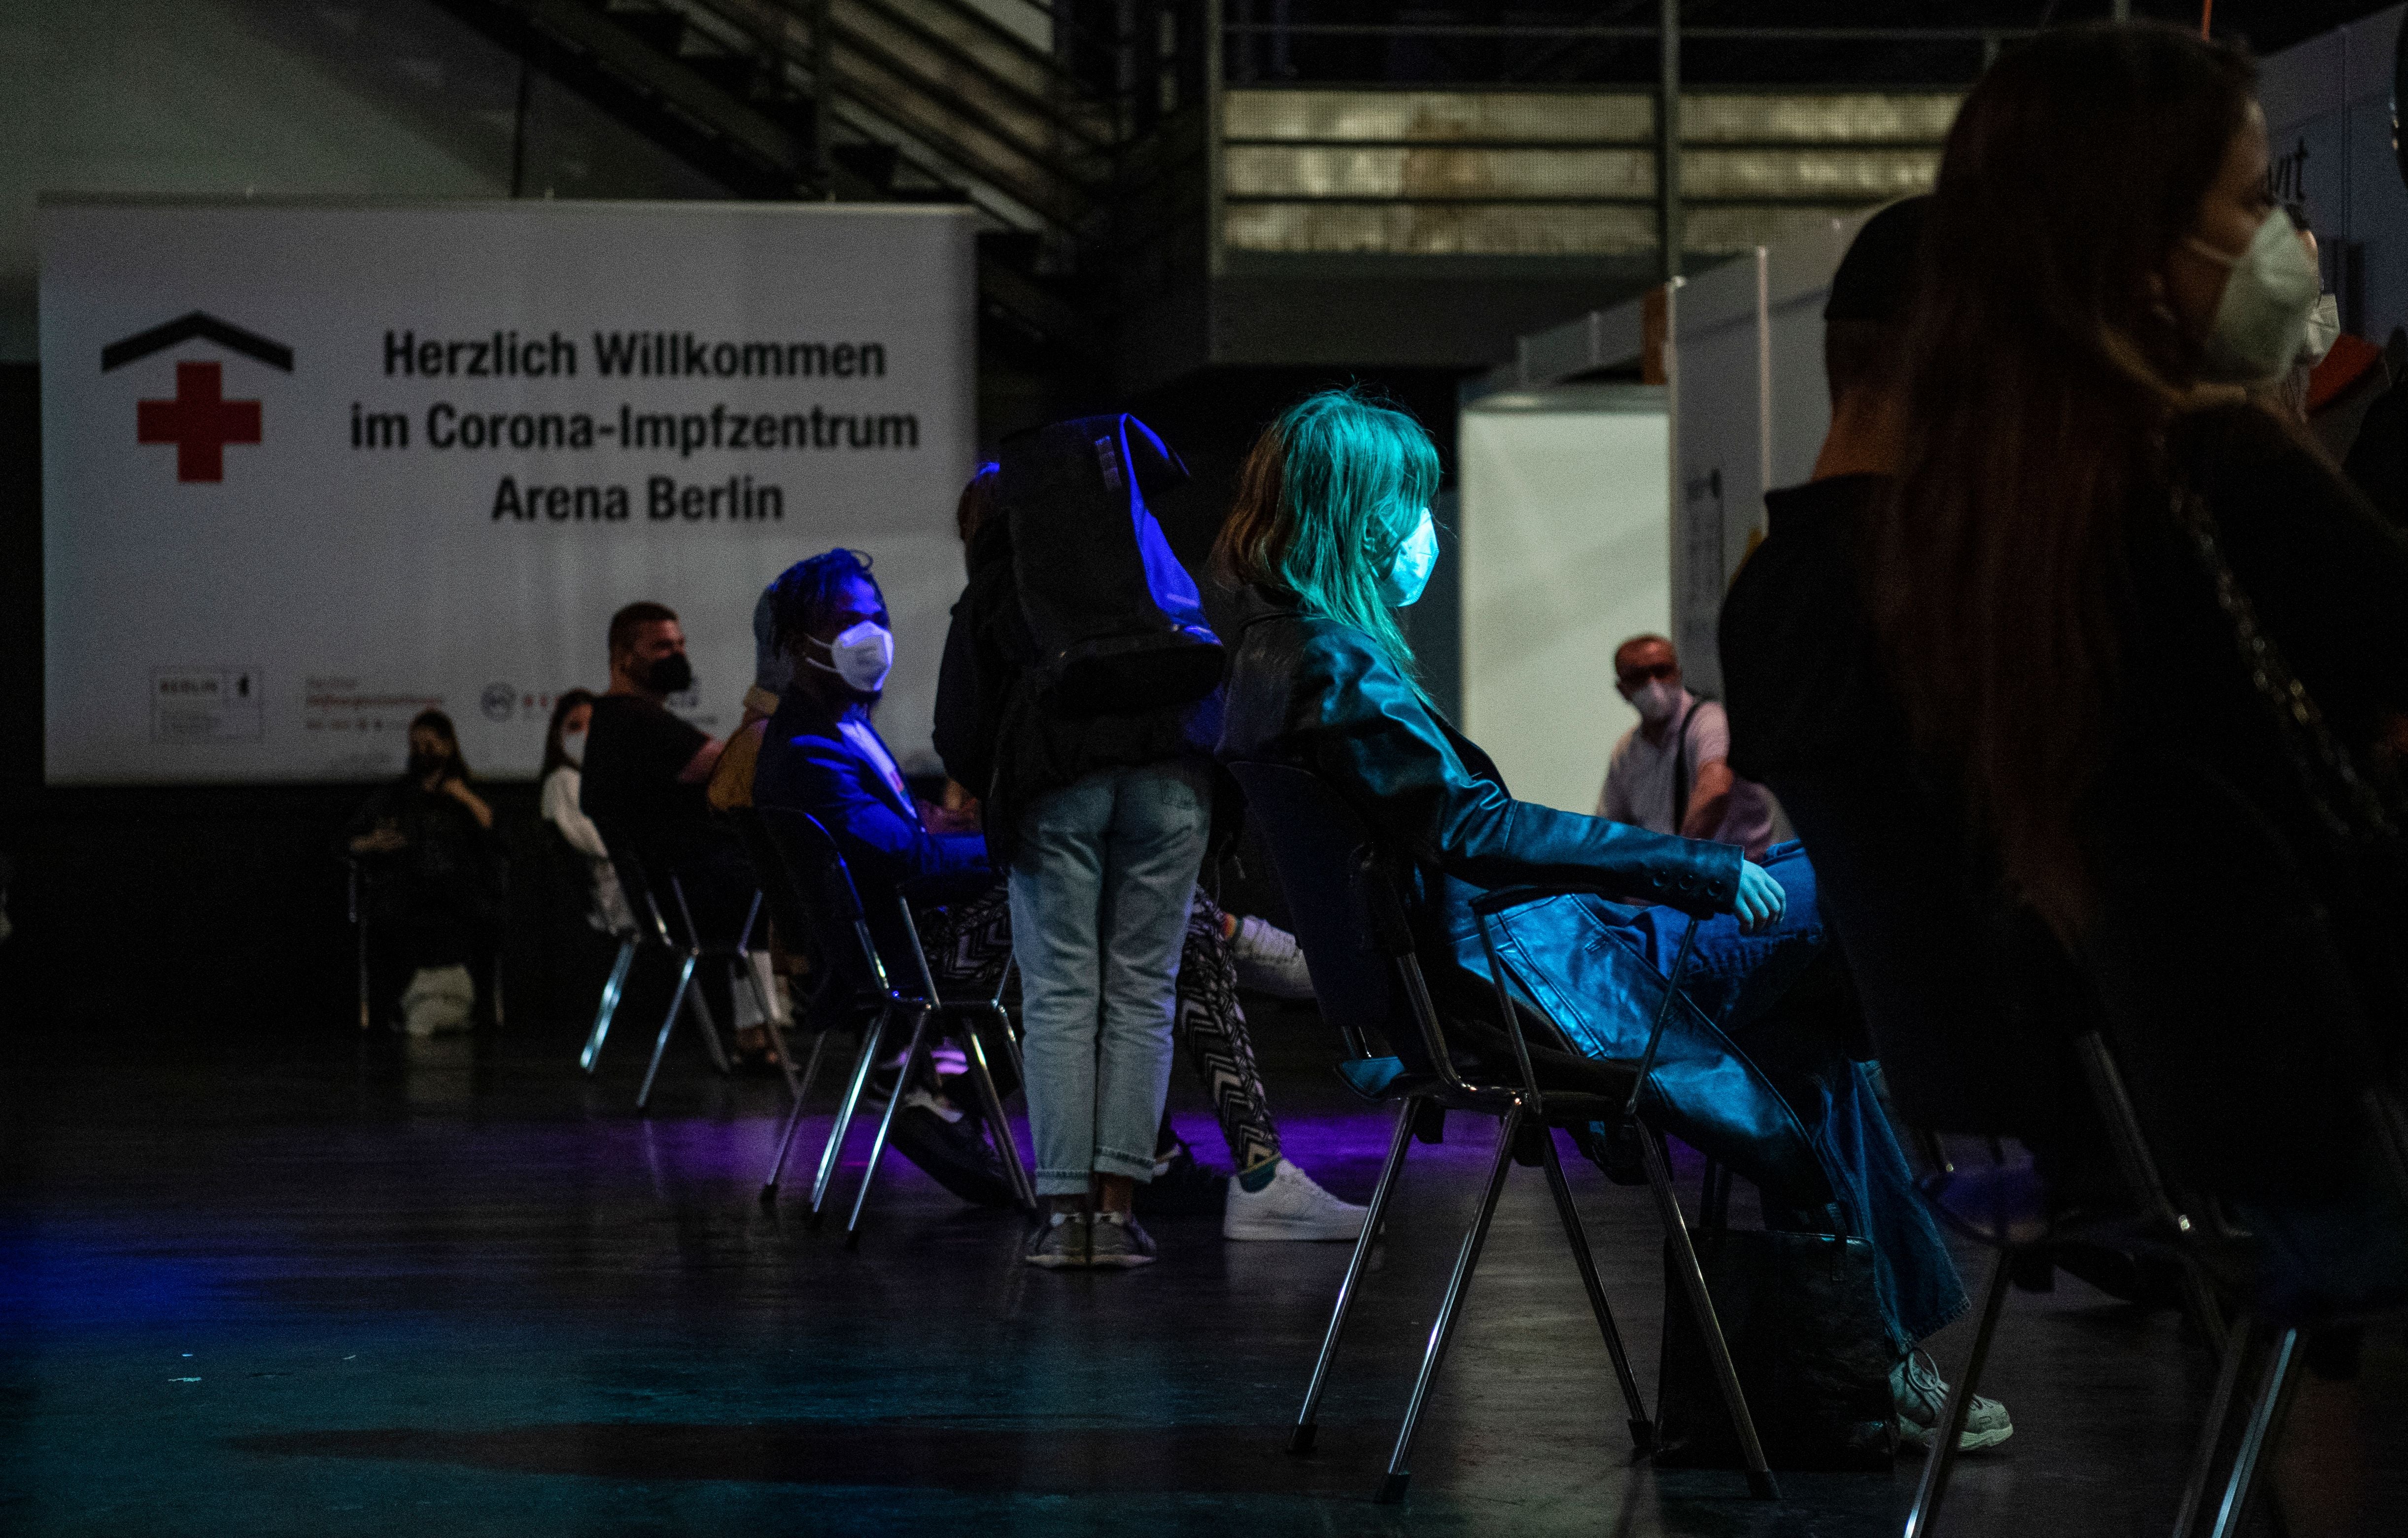 People wait to receive a Covid-19 vaccination shot at the Arena Treptow vaccination centre in Berlin on 9 August, 2021, during a so-called “Long Night of Vaccination” which featured local DJs spinning tunes for attendees until midnight. - A German nurse is suspected of replacing Covid vaccines with saline solution.